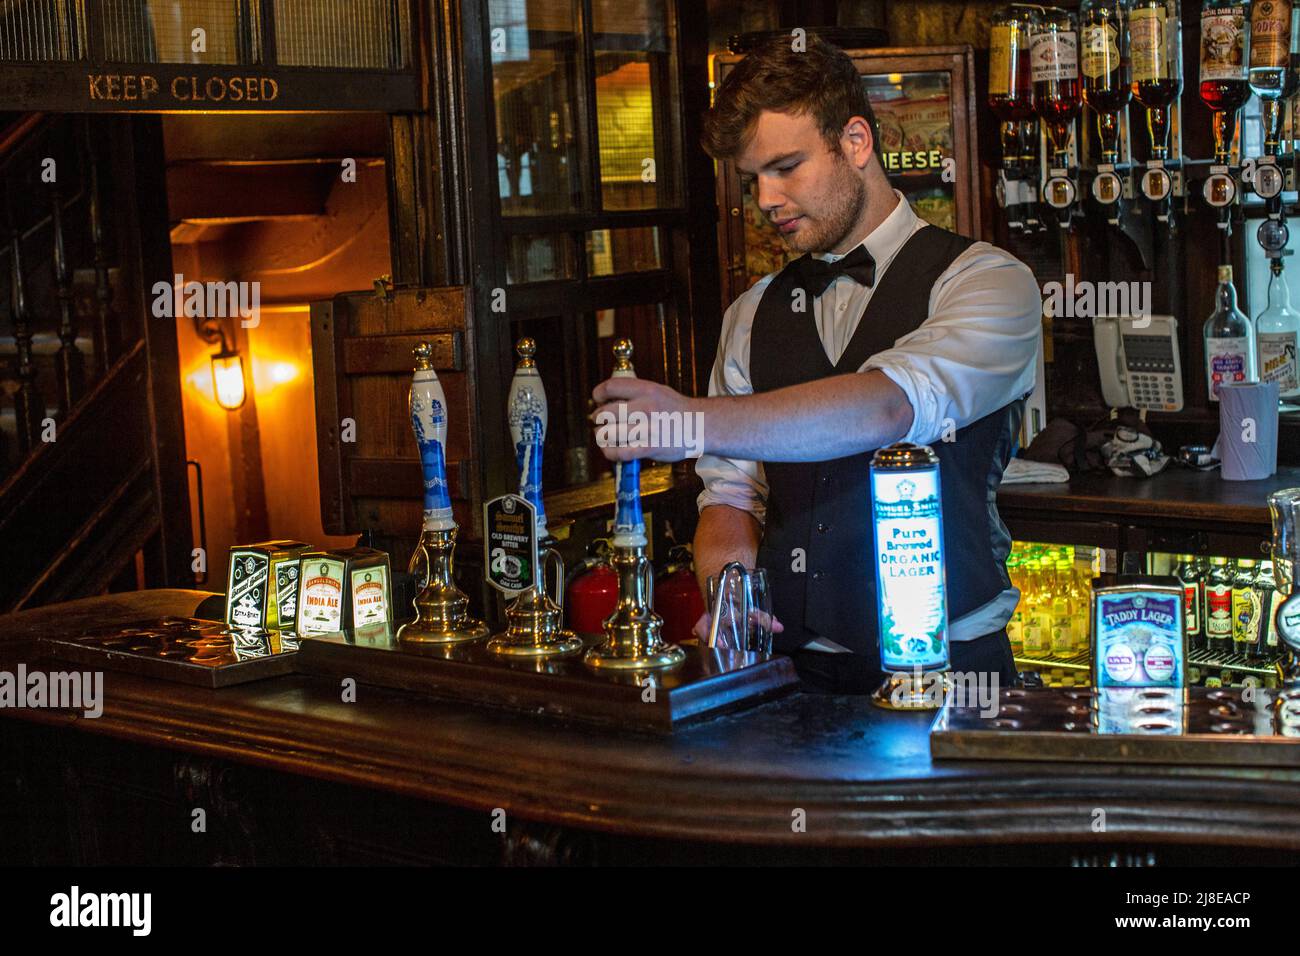 Bar man pulling pint of beer  at  traditional pub The Ye Olde Cheshire Cheese The City of London, United Kingdom Stock Photo